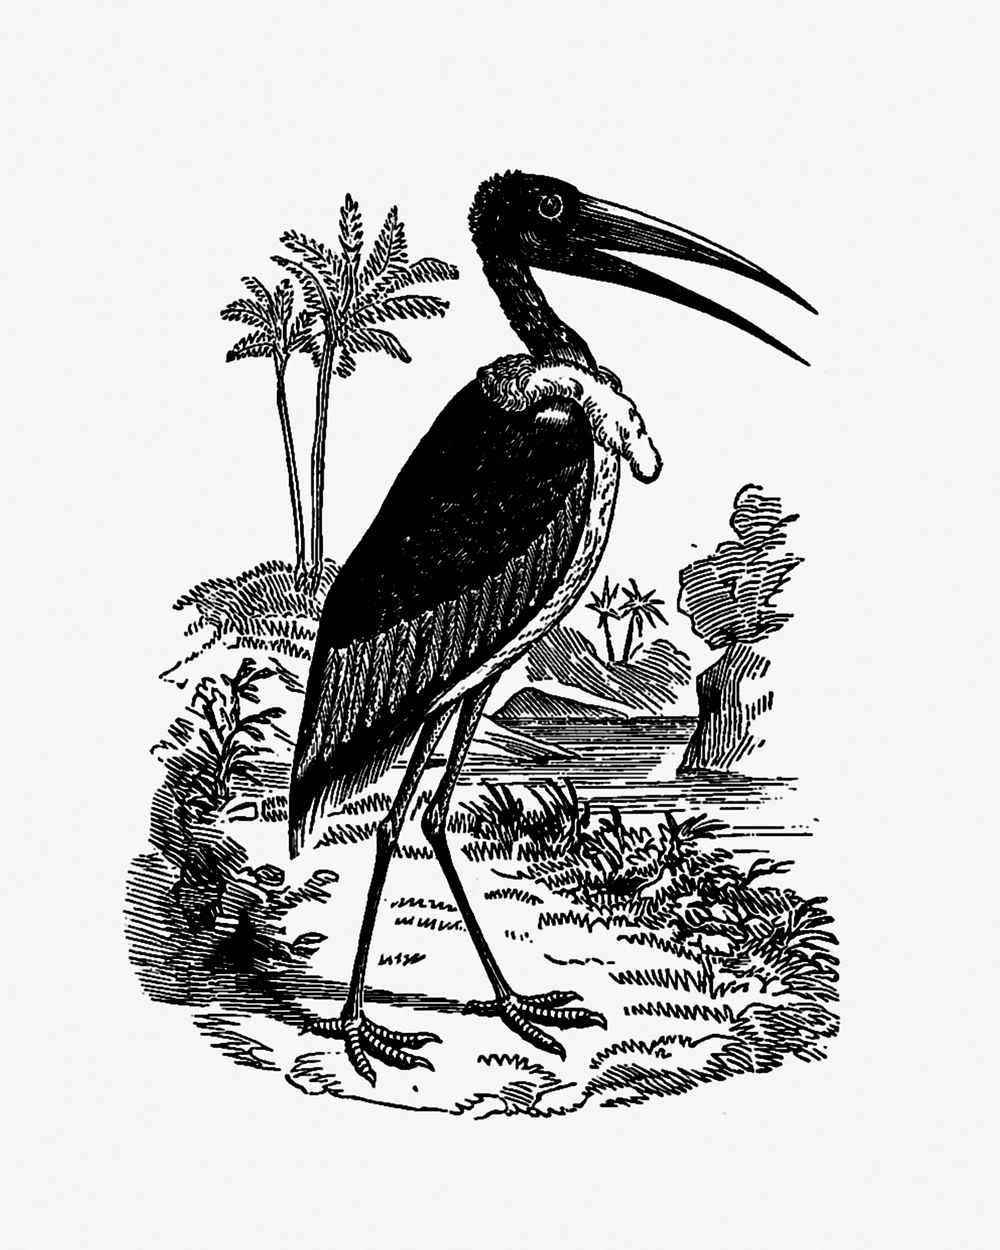 Drawing of greater adjutant